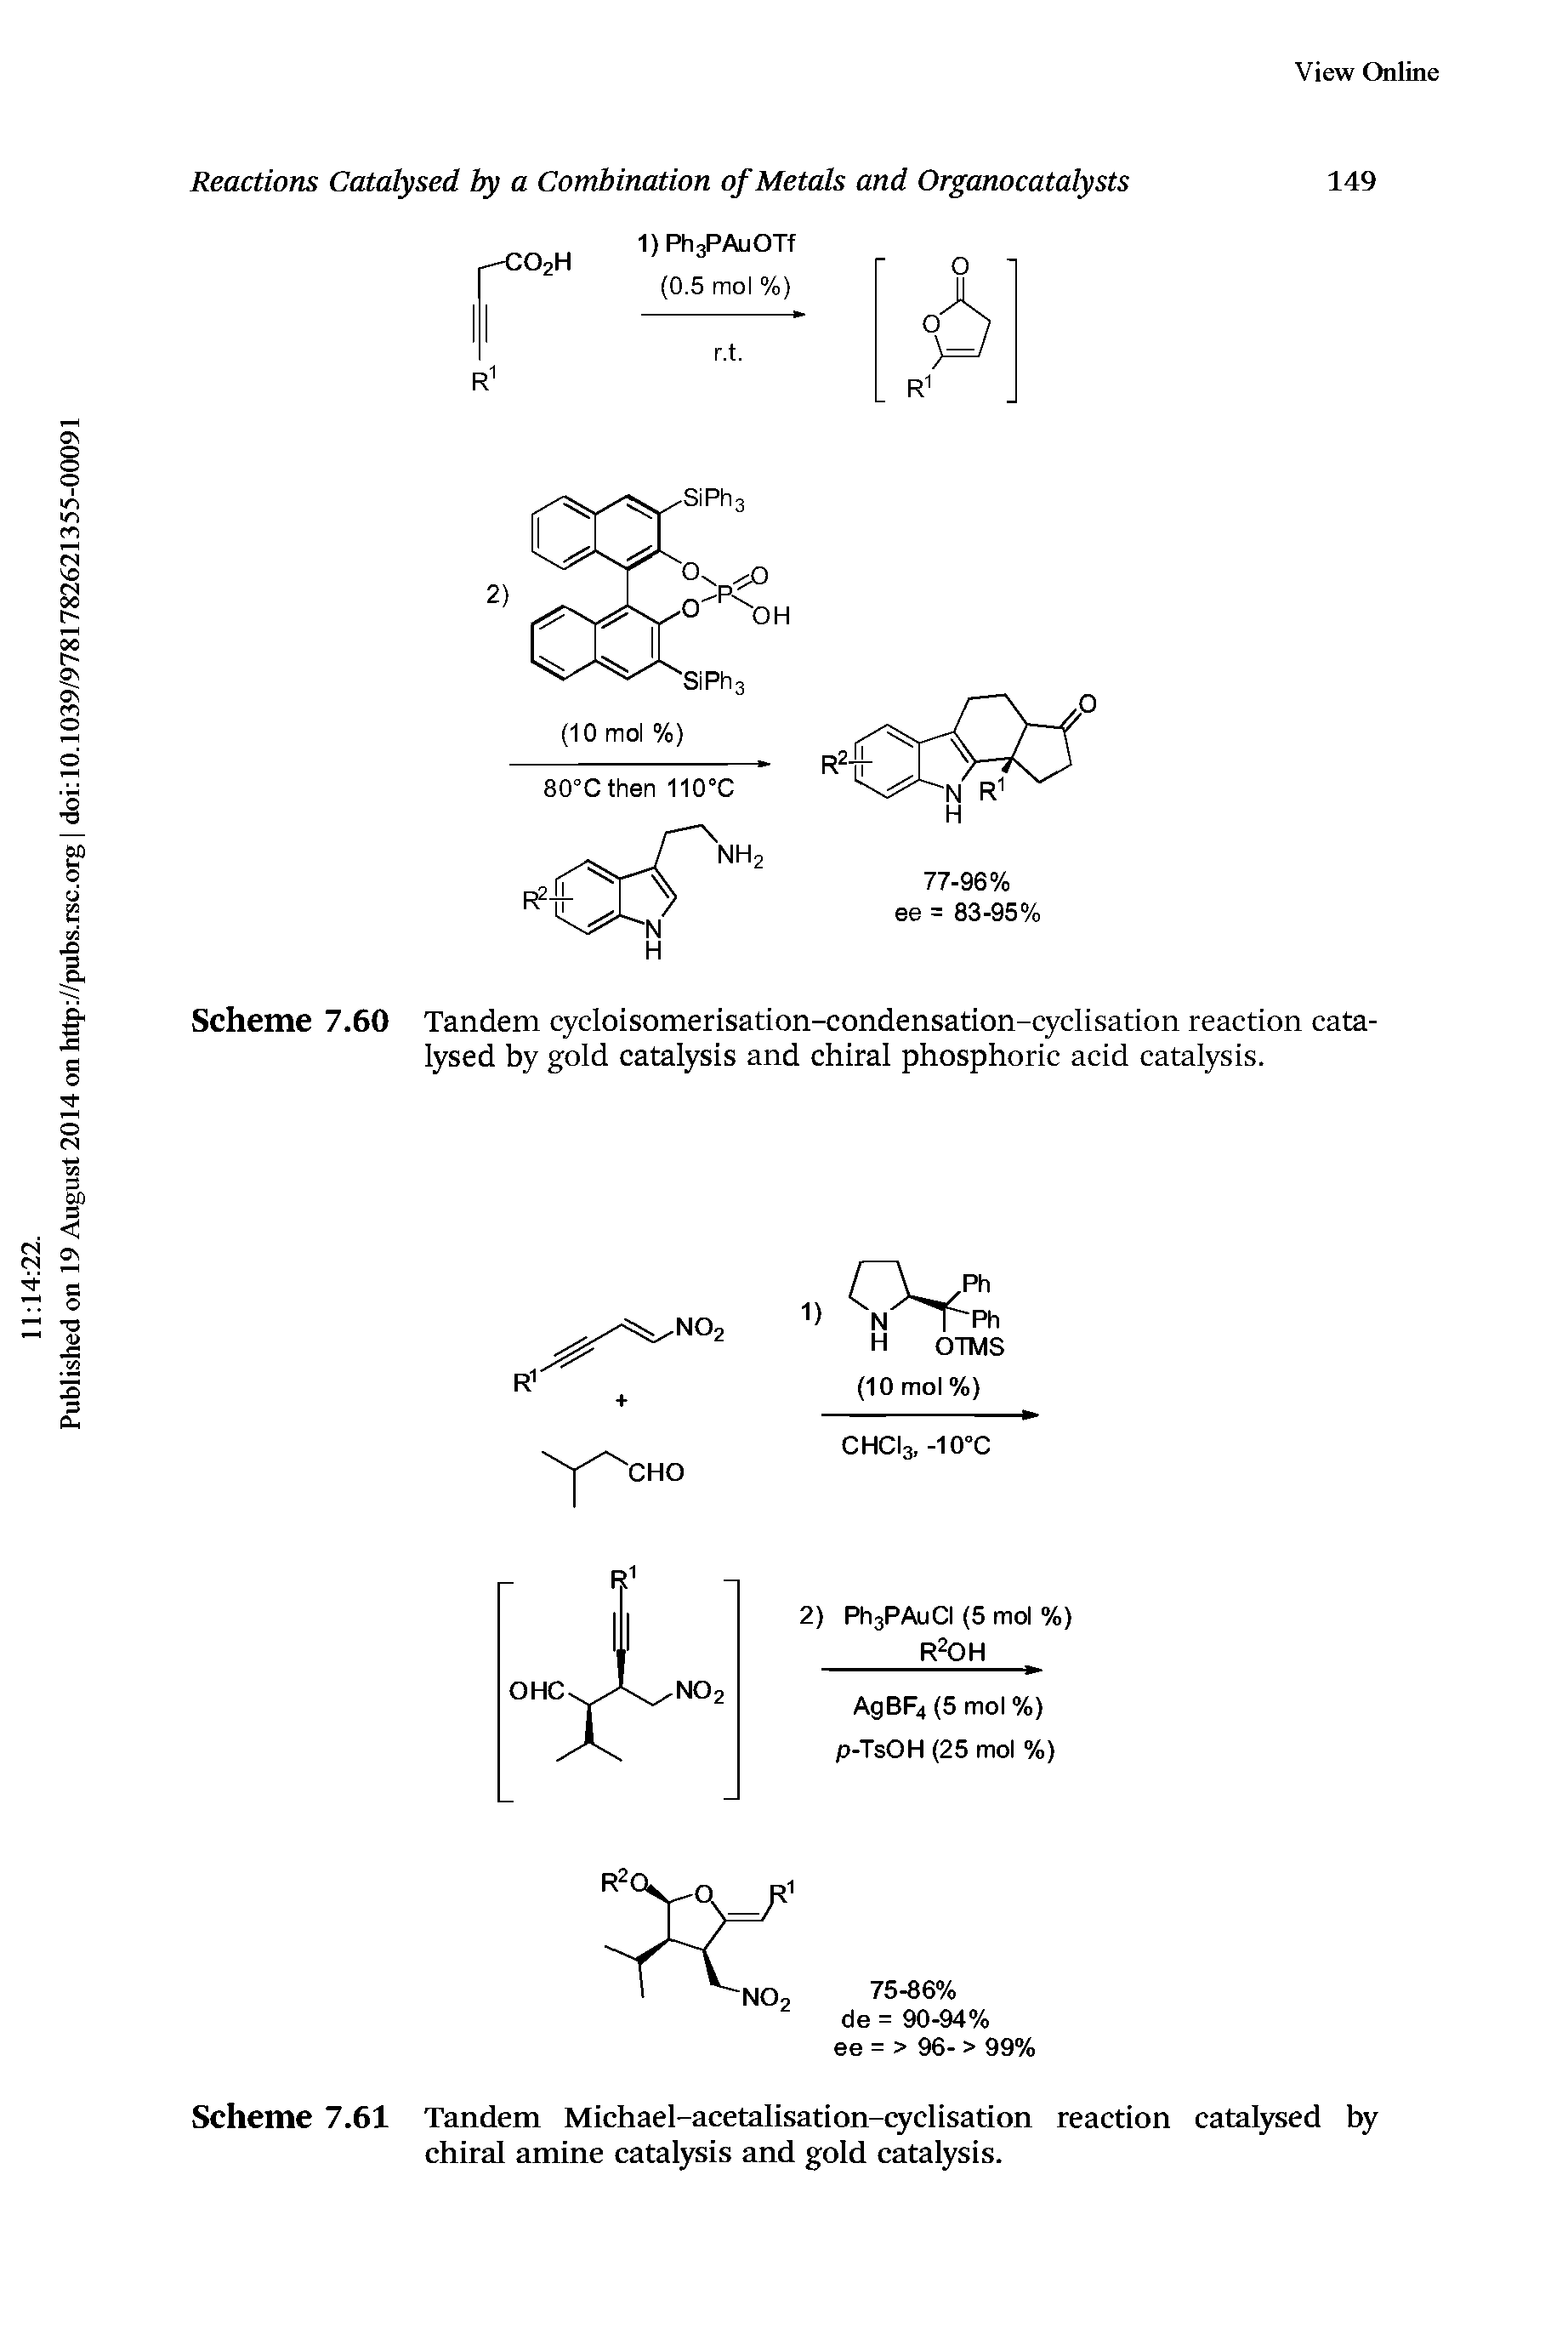 Scheme 7.60 Tandem cycloisomerisation-condensation-q clisation reaction catalysed by gold catalysis and chiral phosphoric acid catalysis.